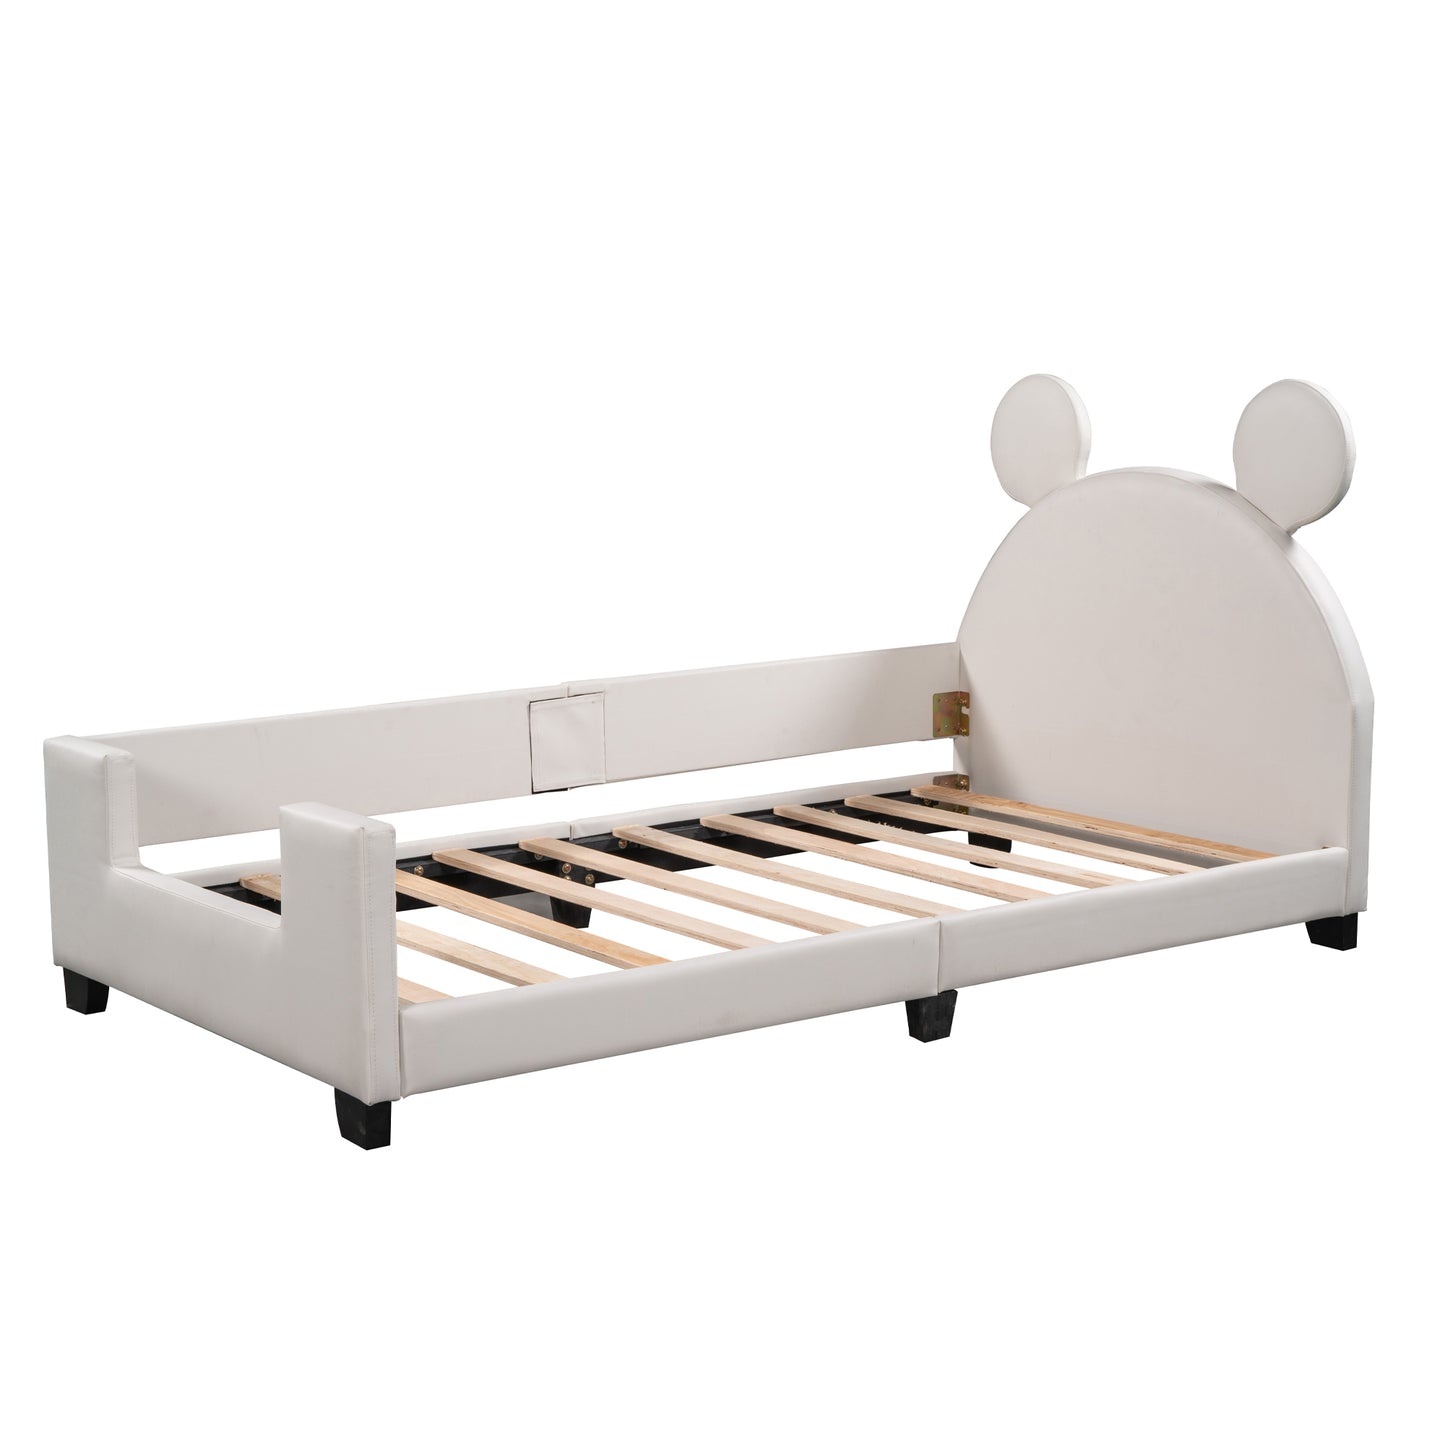 Kids Twin Upholstered Day Bed Frame for Boys Girls Toddlers, Wood Platform Bed with Mouse Ears Headboard for Kids' Room Bedroom, PU Leather Sofa Bed Floor Bed, Easy Assemble, White